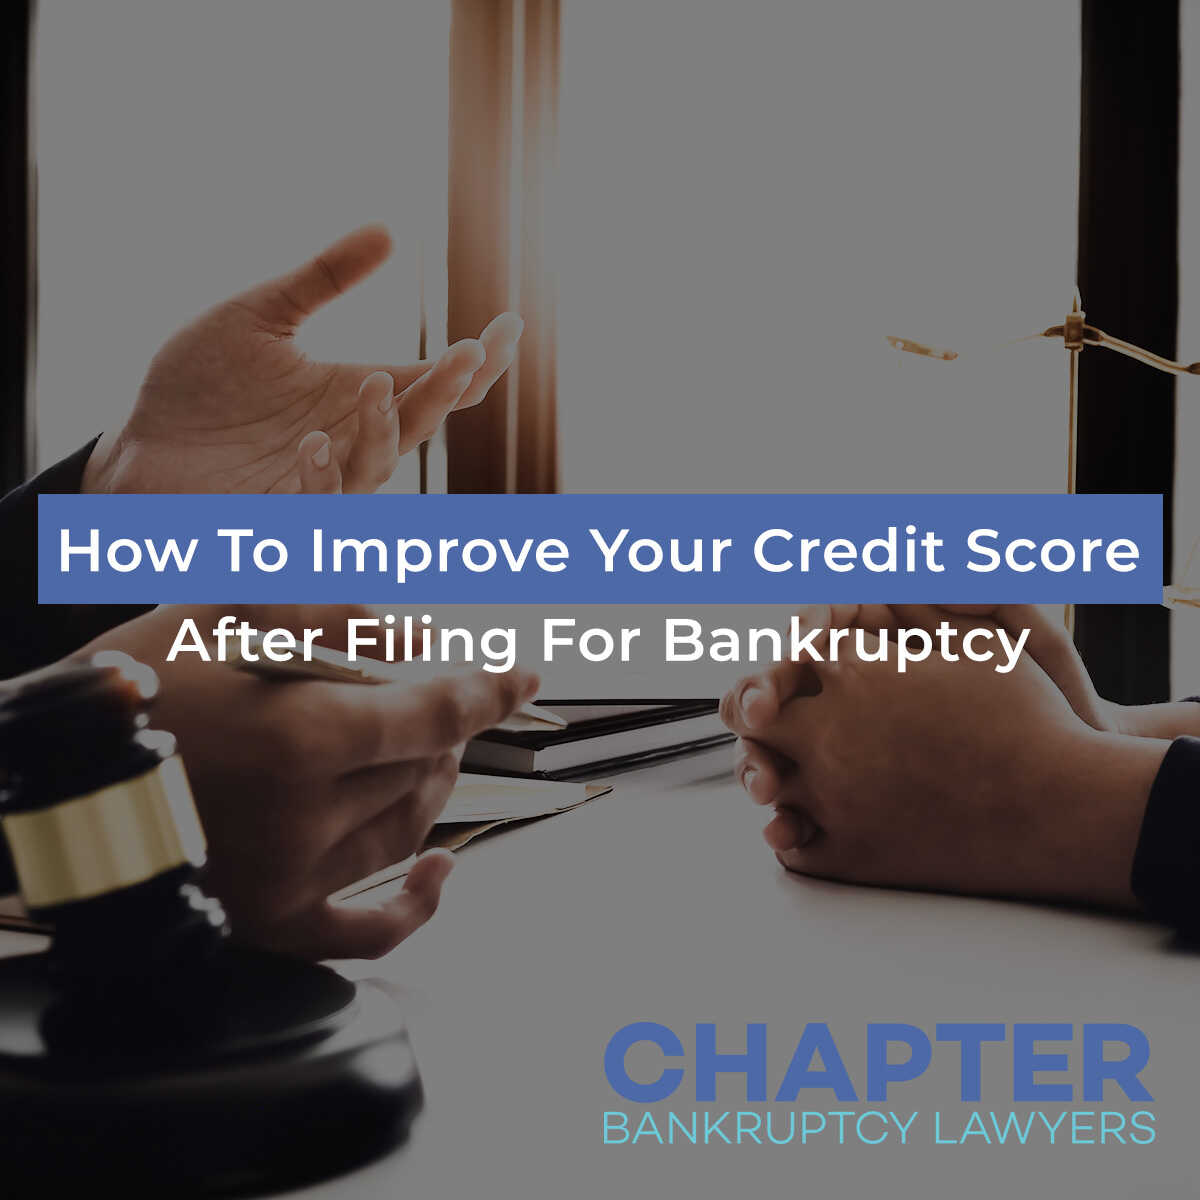 How To Improve Your Credit Score After Filing For Bankruptcy